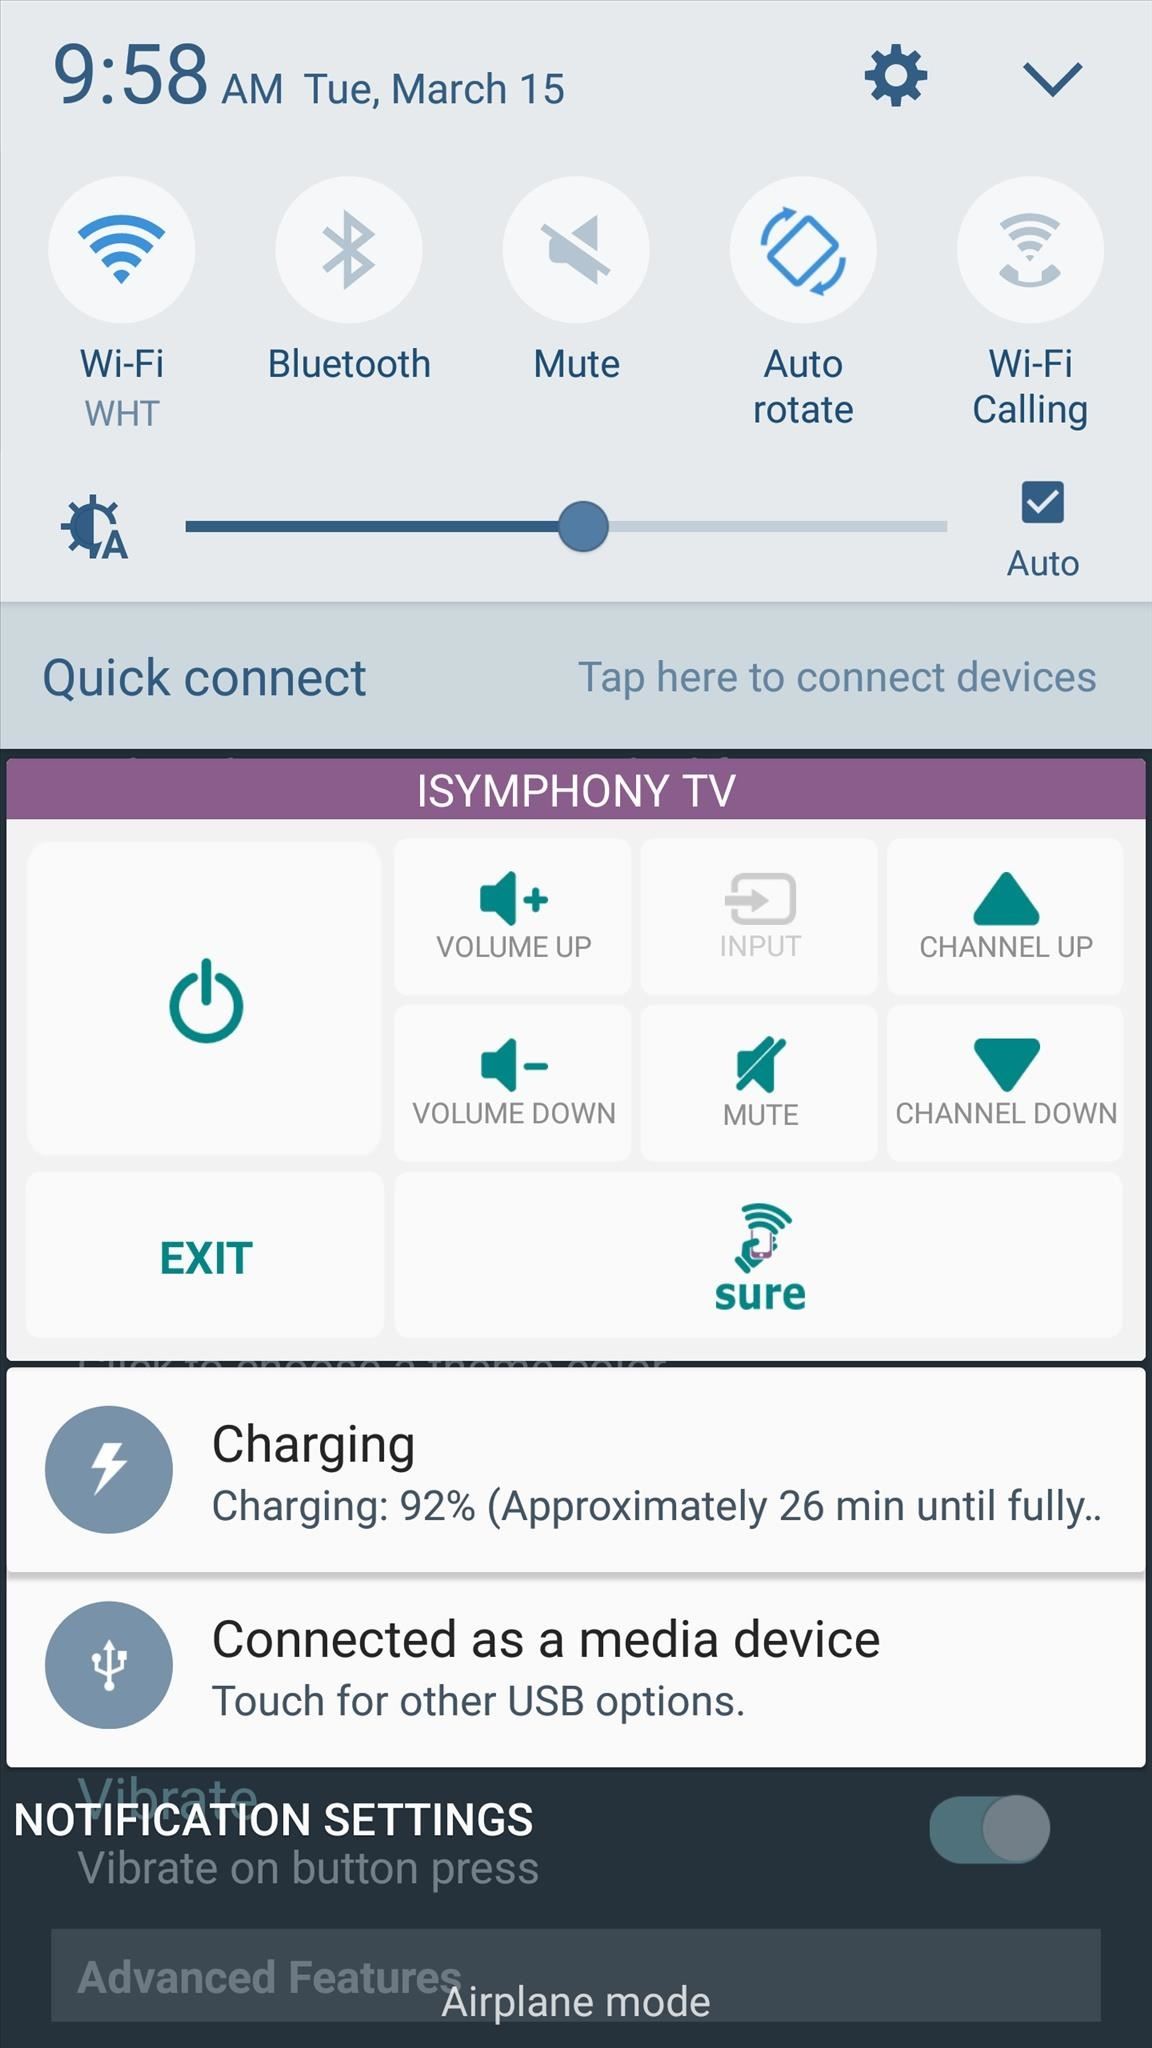 Turn Your Android Phone into a Universal Remote Control with These Cool Apps